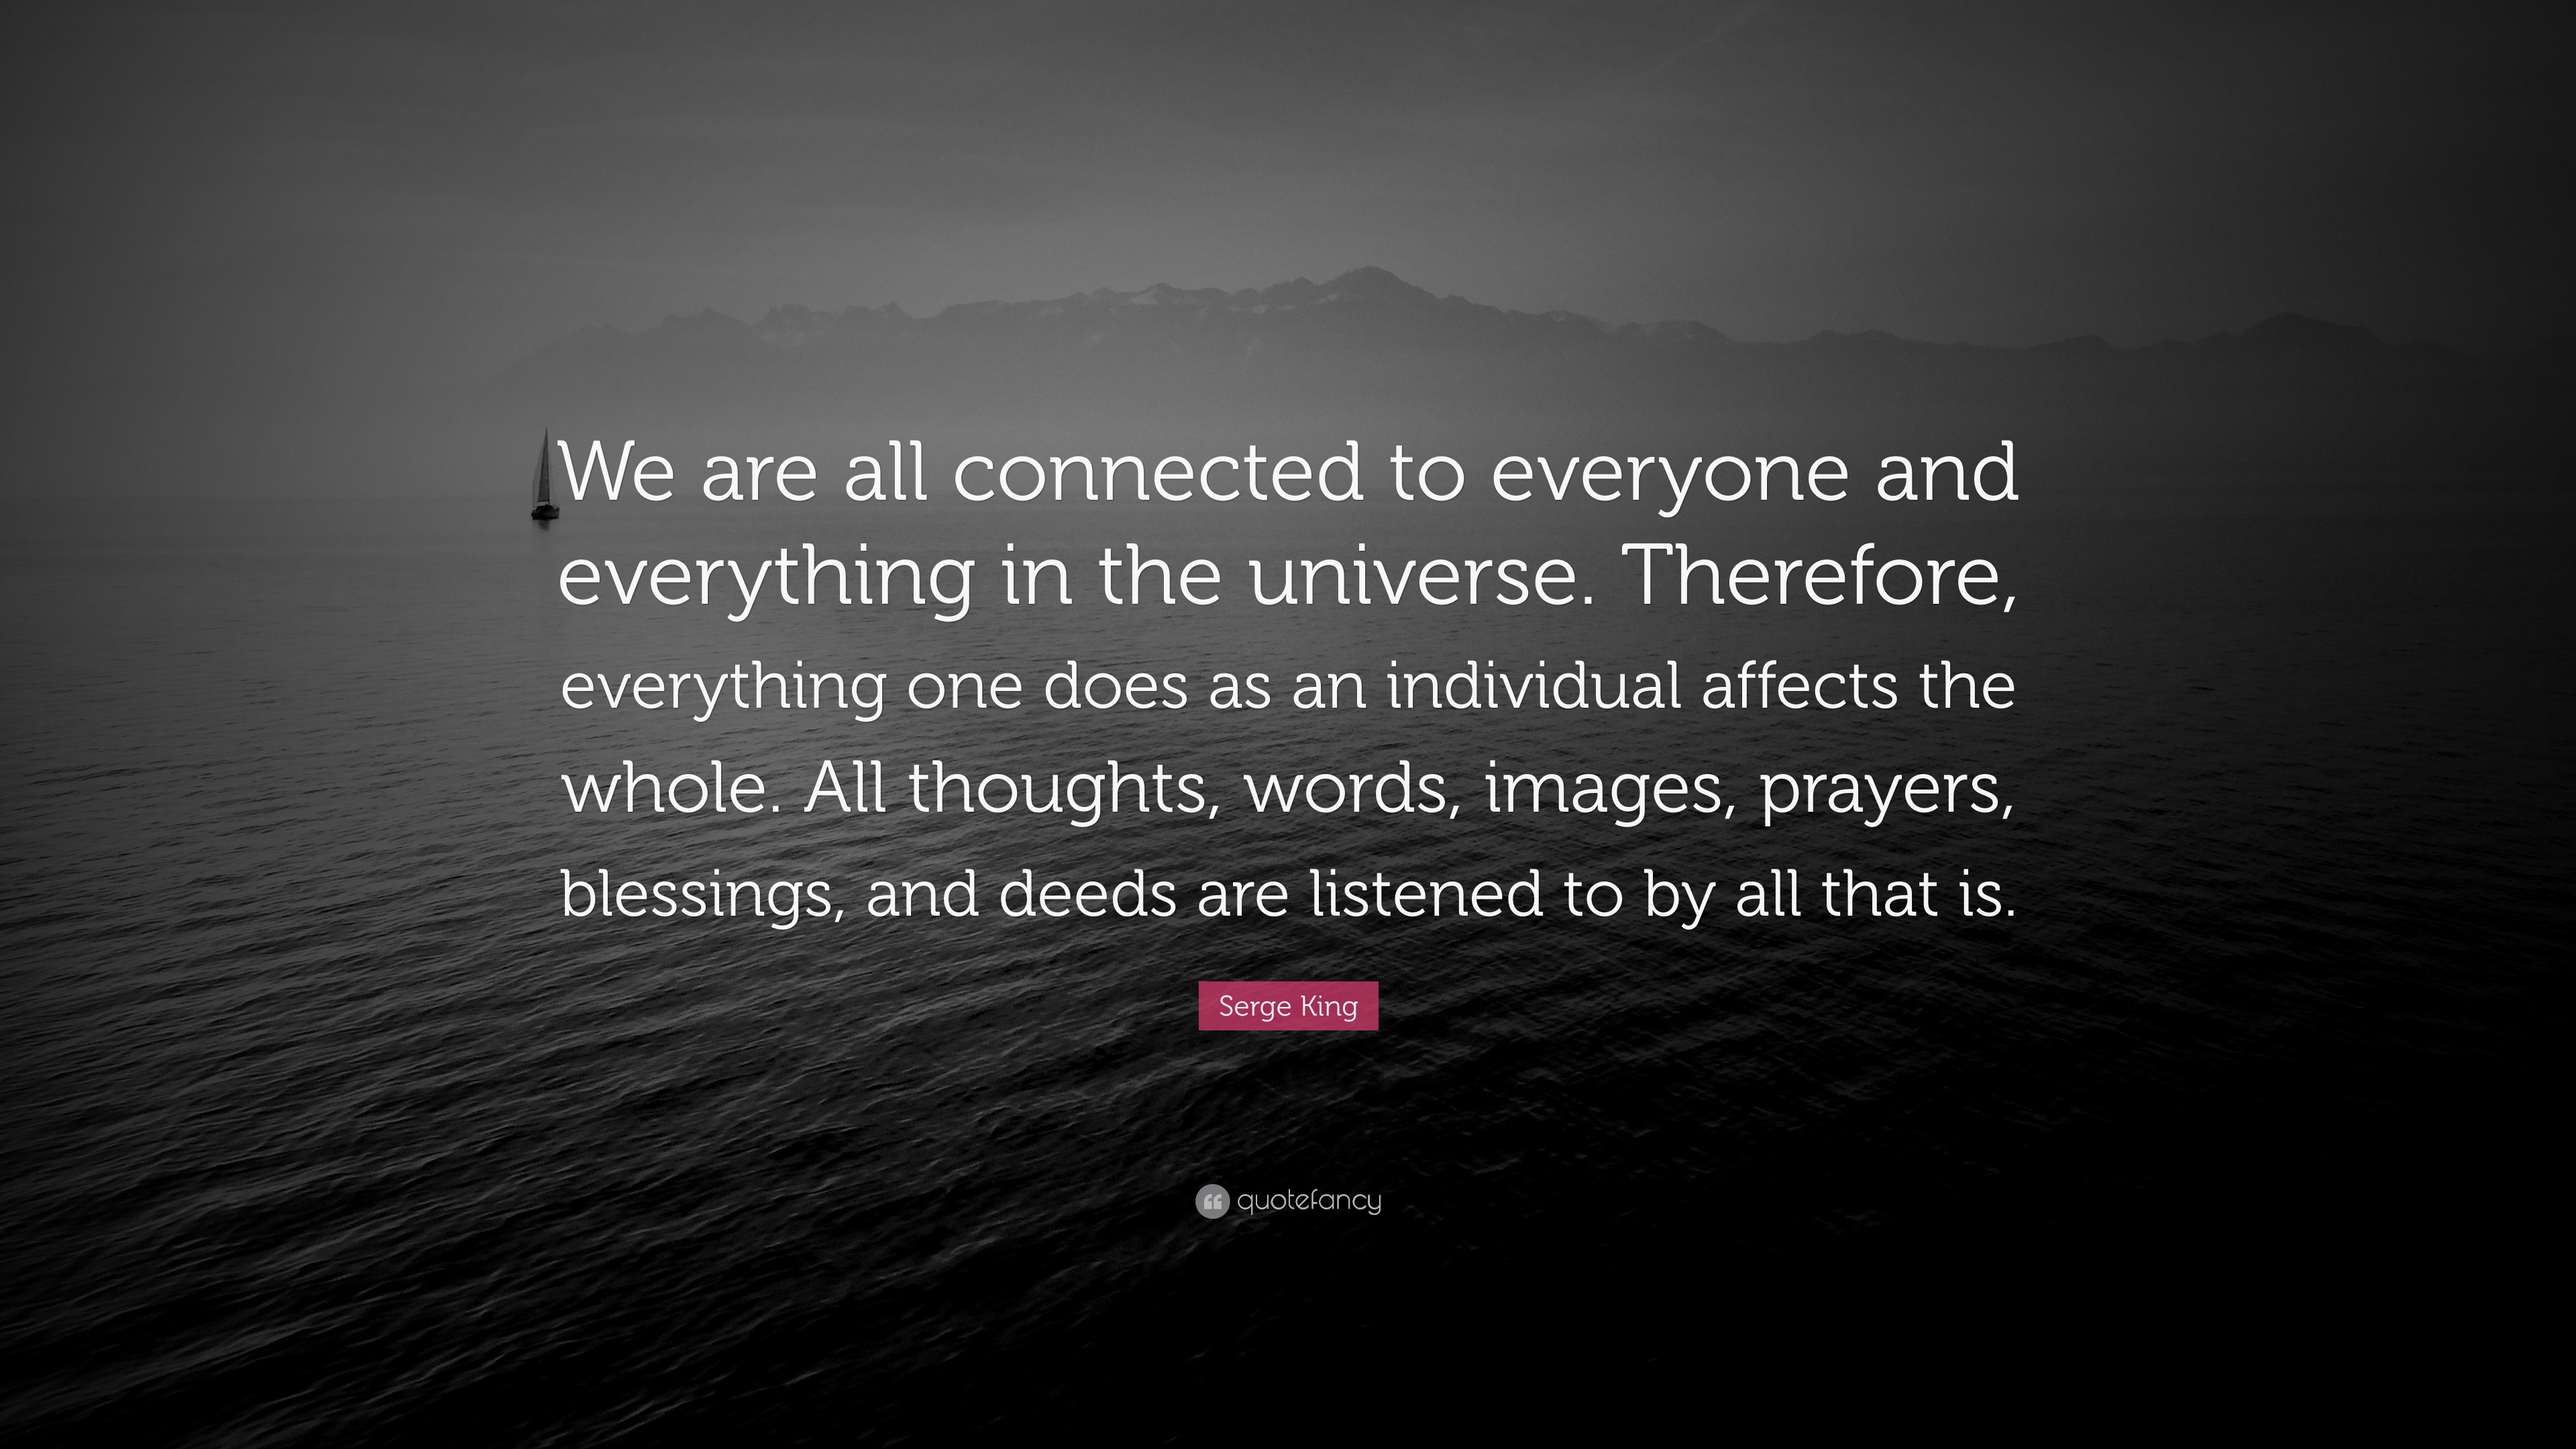 We Are All Connected Quotes - Allquotesideas